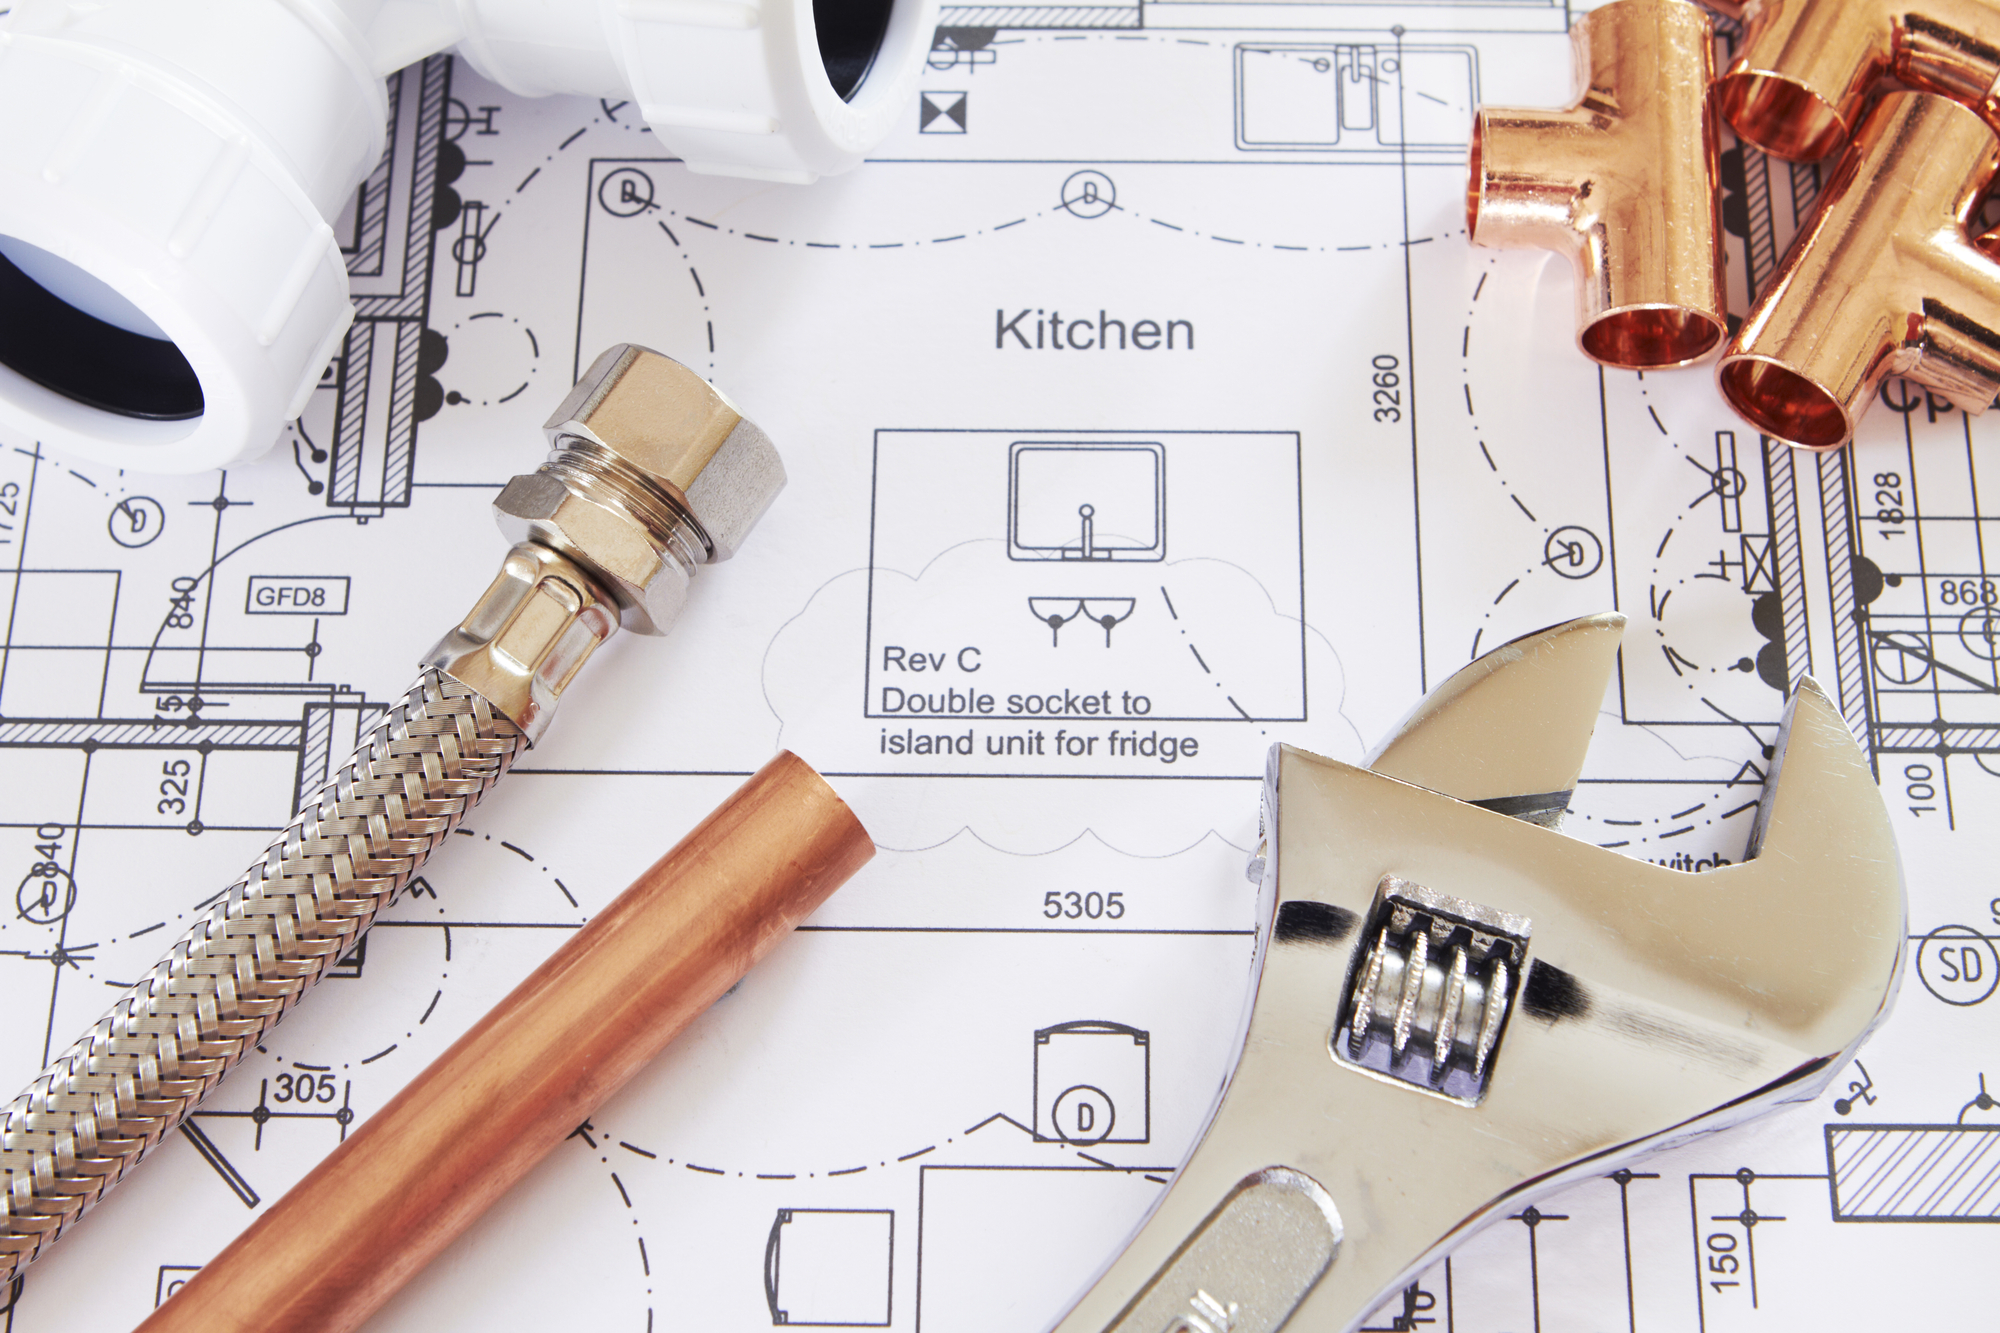 Tips to Consider Before Installing a New Plumbing System